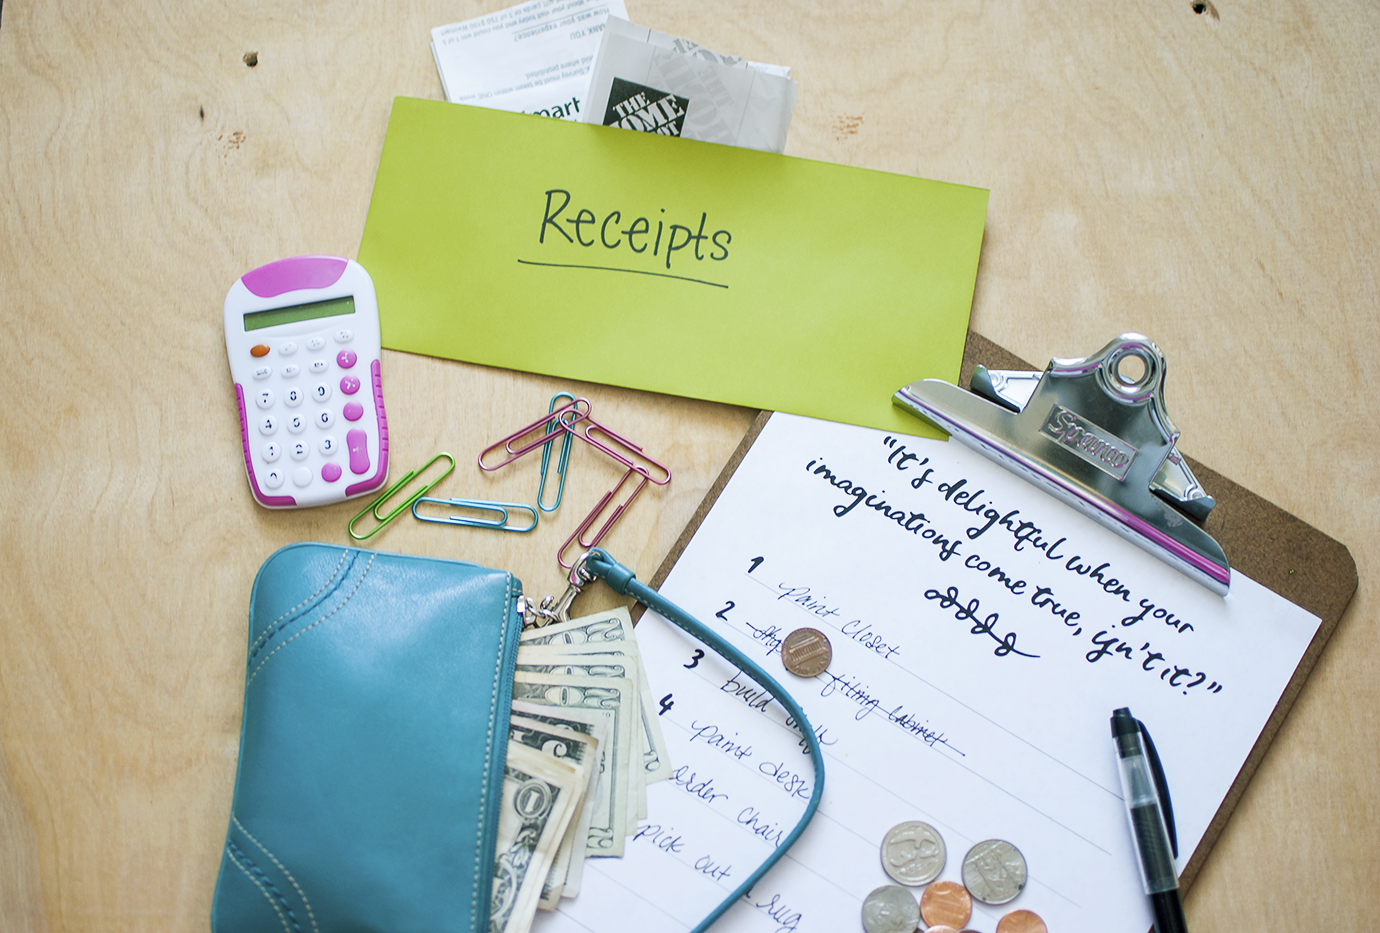 Aqua Blue Wallet with Paper Money and Coins Clipboard with Project Checklist and Receipts Envelope | Budget Saving Tips For Home Remodel Projects